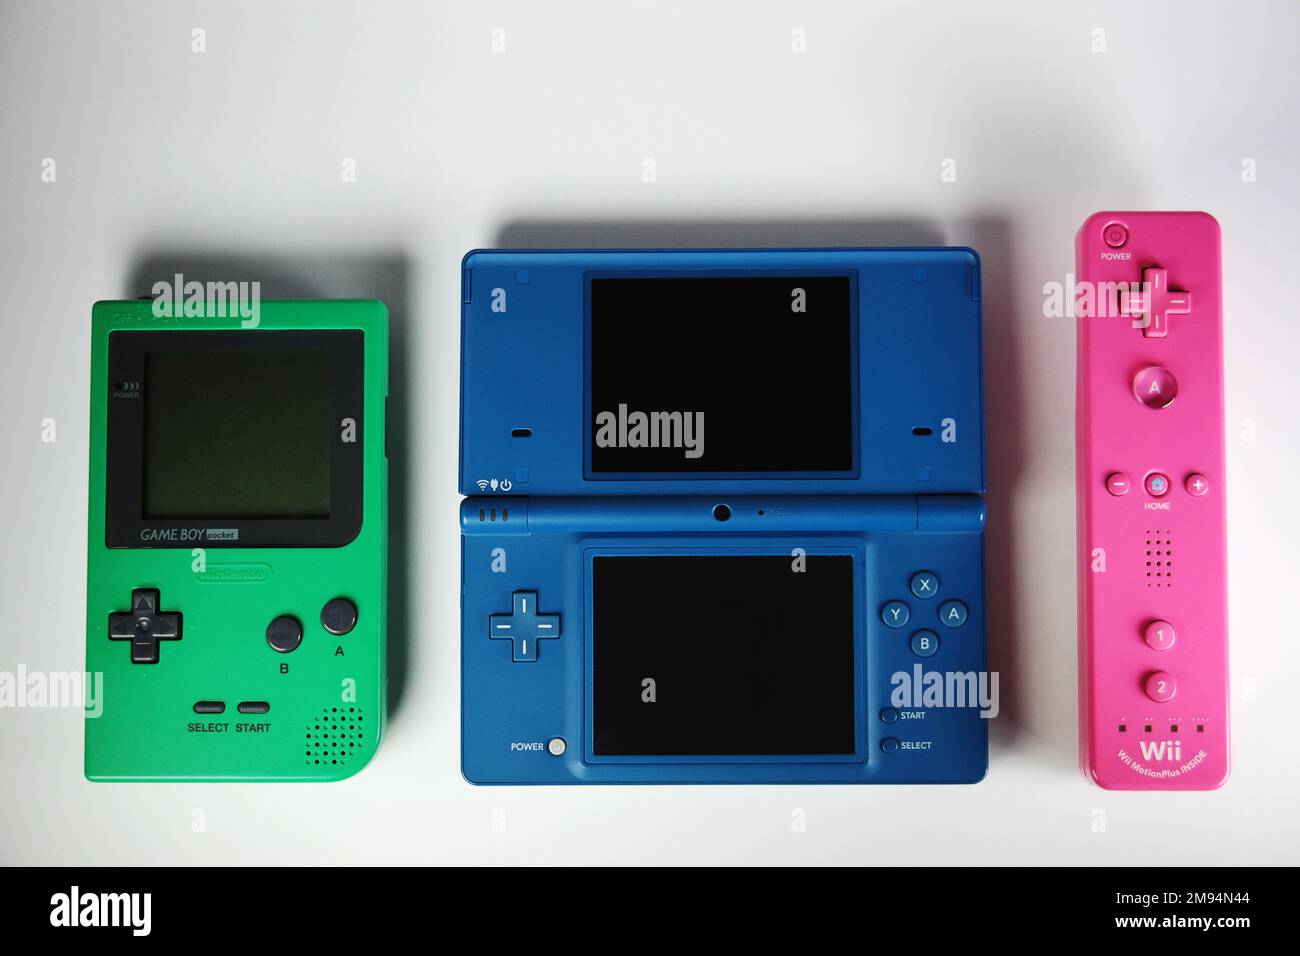 Nintendo ds hi-res photography images -